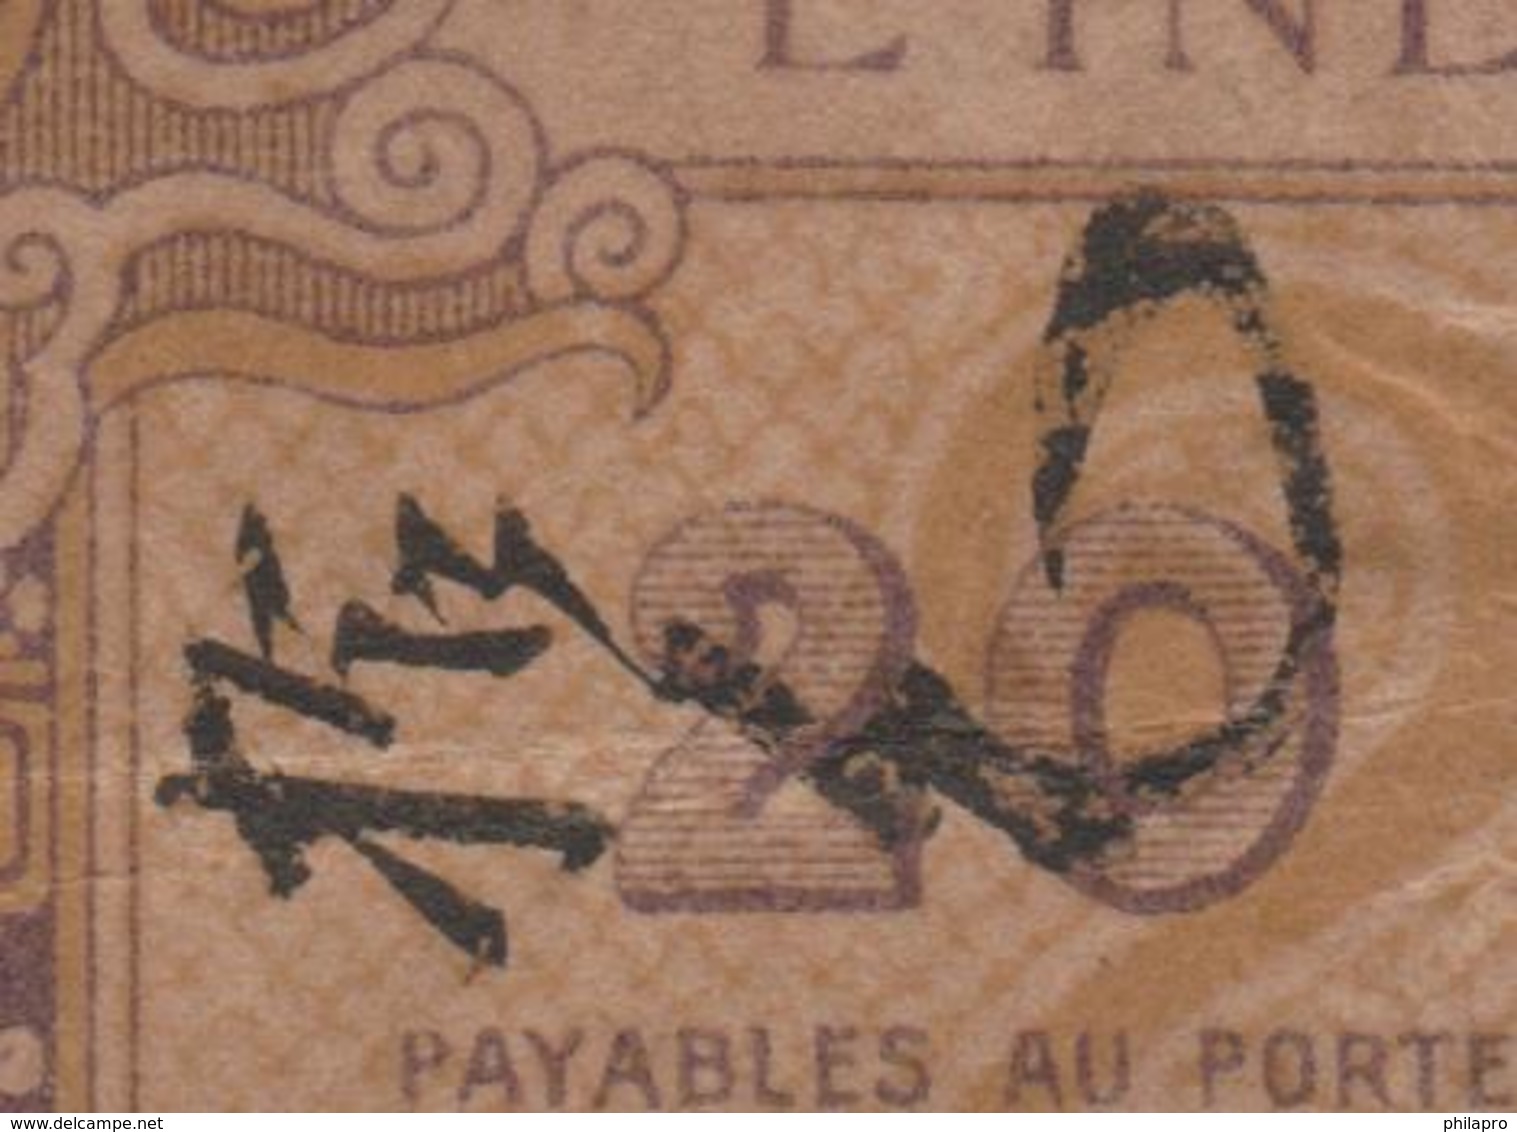 INDOCHINE CAMBODGE LAOS  VIETNAM  20 CENTS     PICK N°45 F + Ovpt  See 3 Scans - Indochine